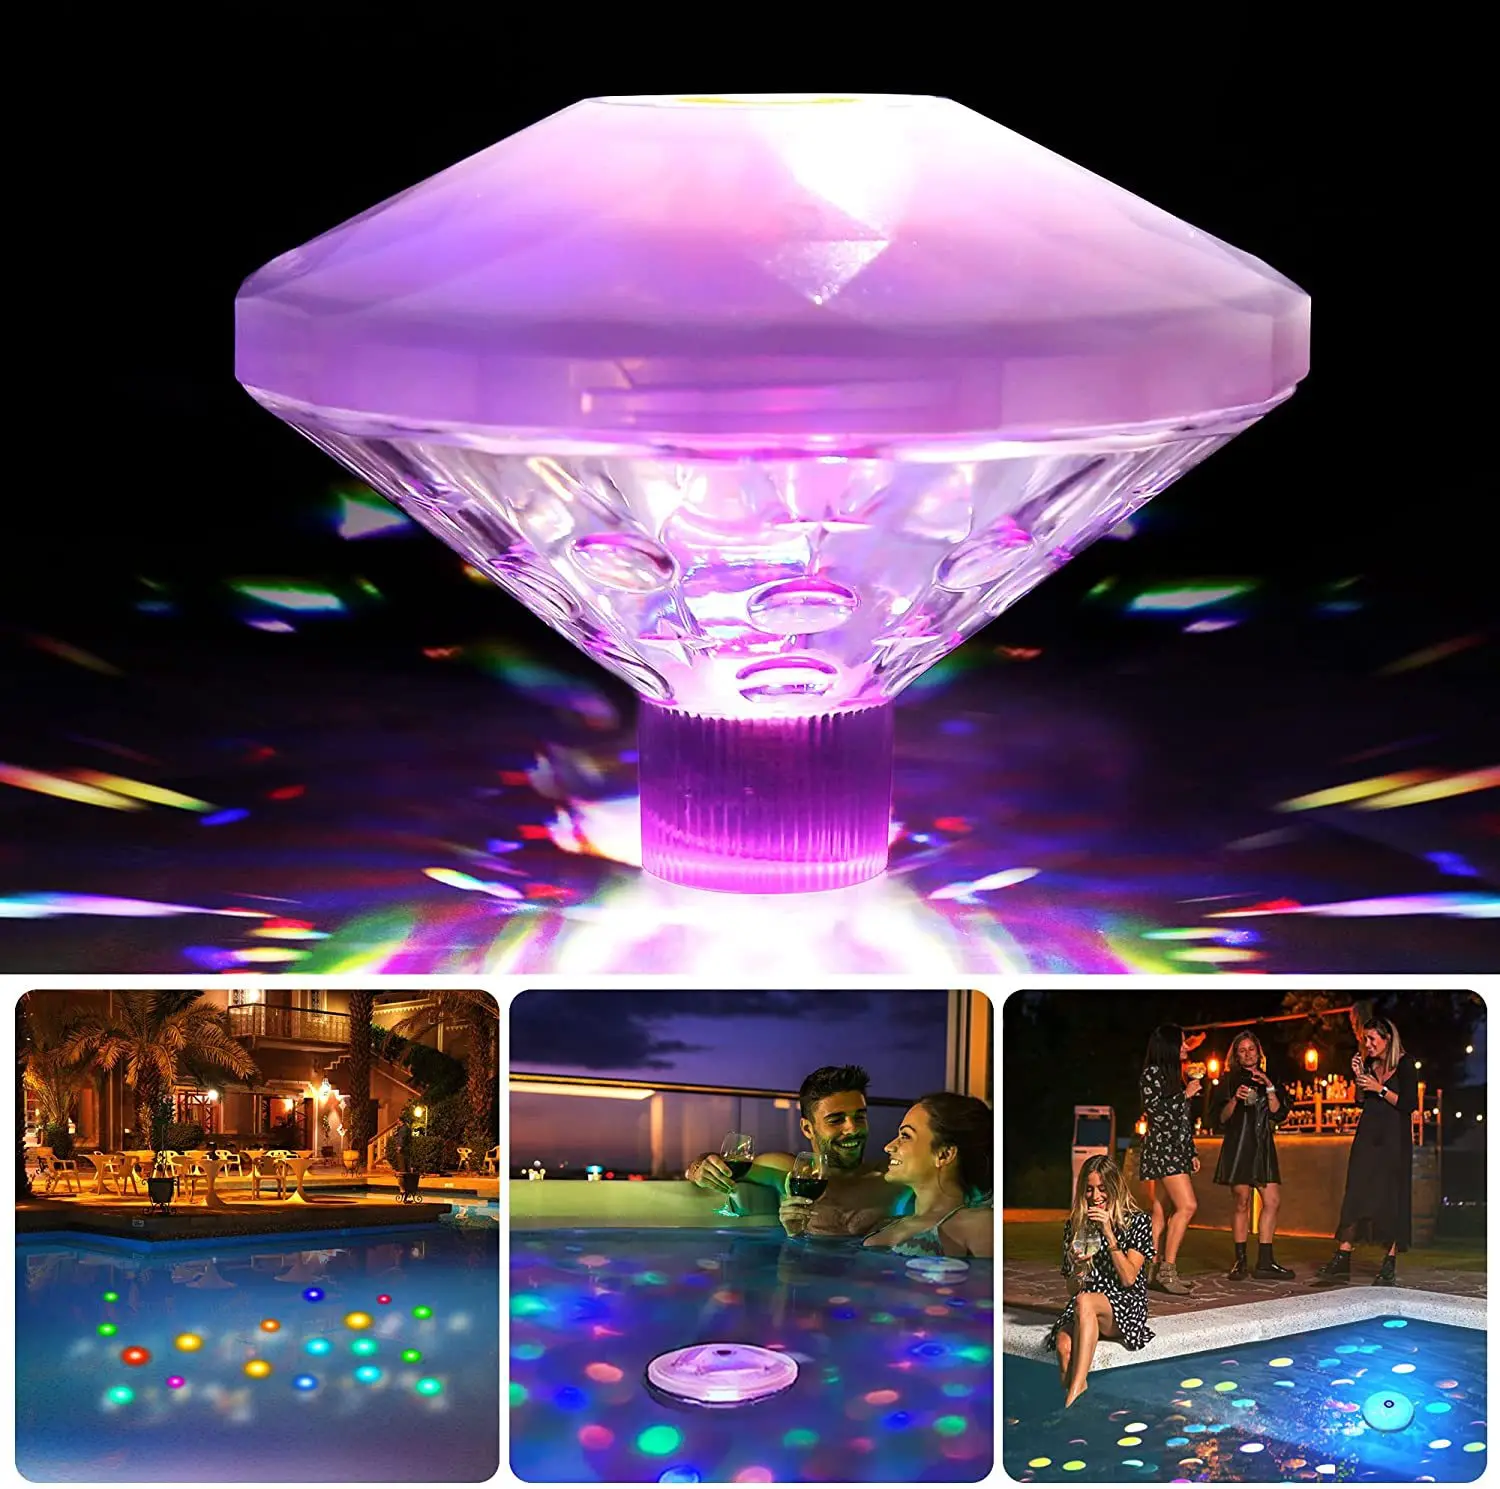 

LED Disco Party Light Floating RGB Underwater Light Submersible Glow Show Swimming Pool Hot Tub Spa Lamp Baby Bath Light